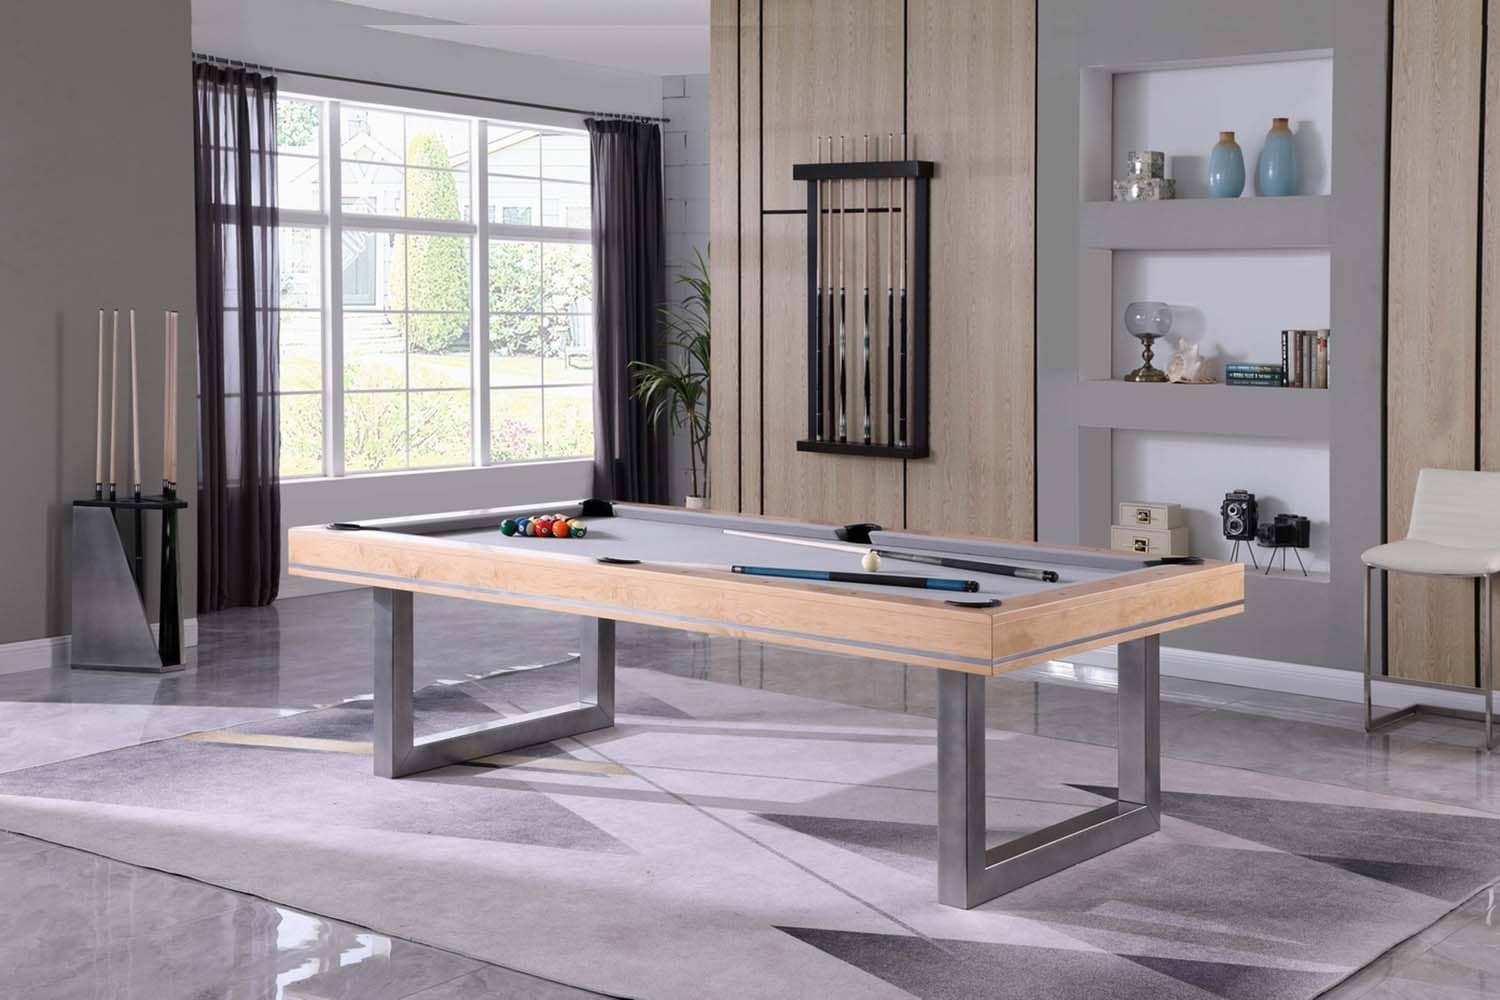 Portland Dining & Pool Table Combo 3